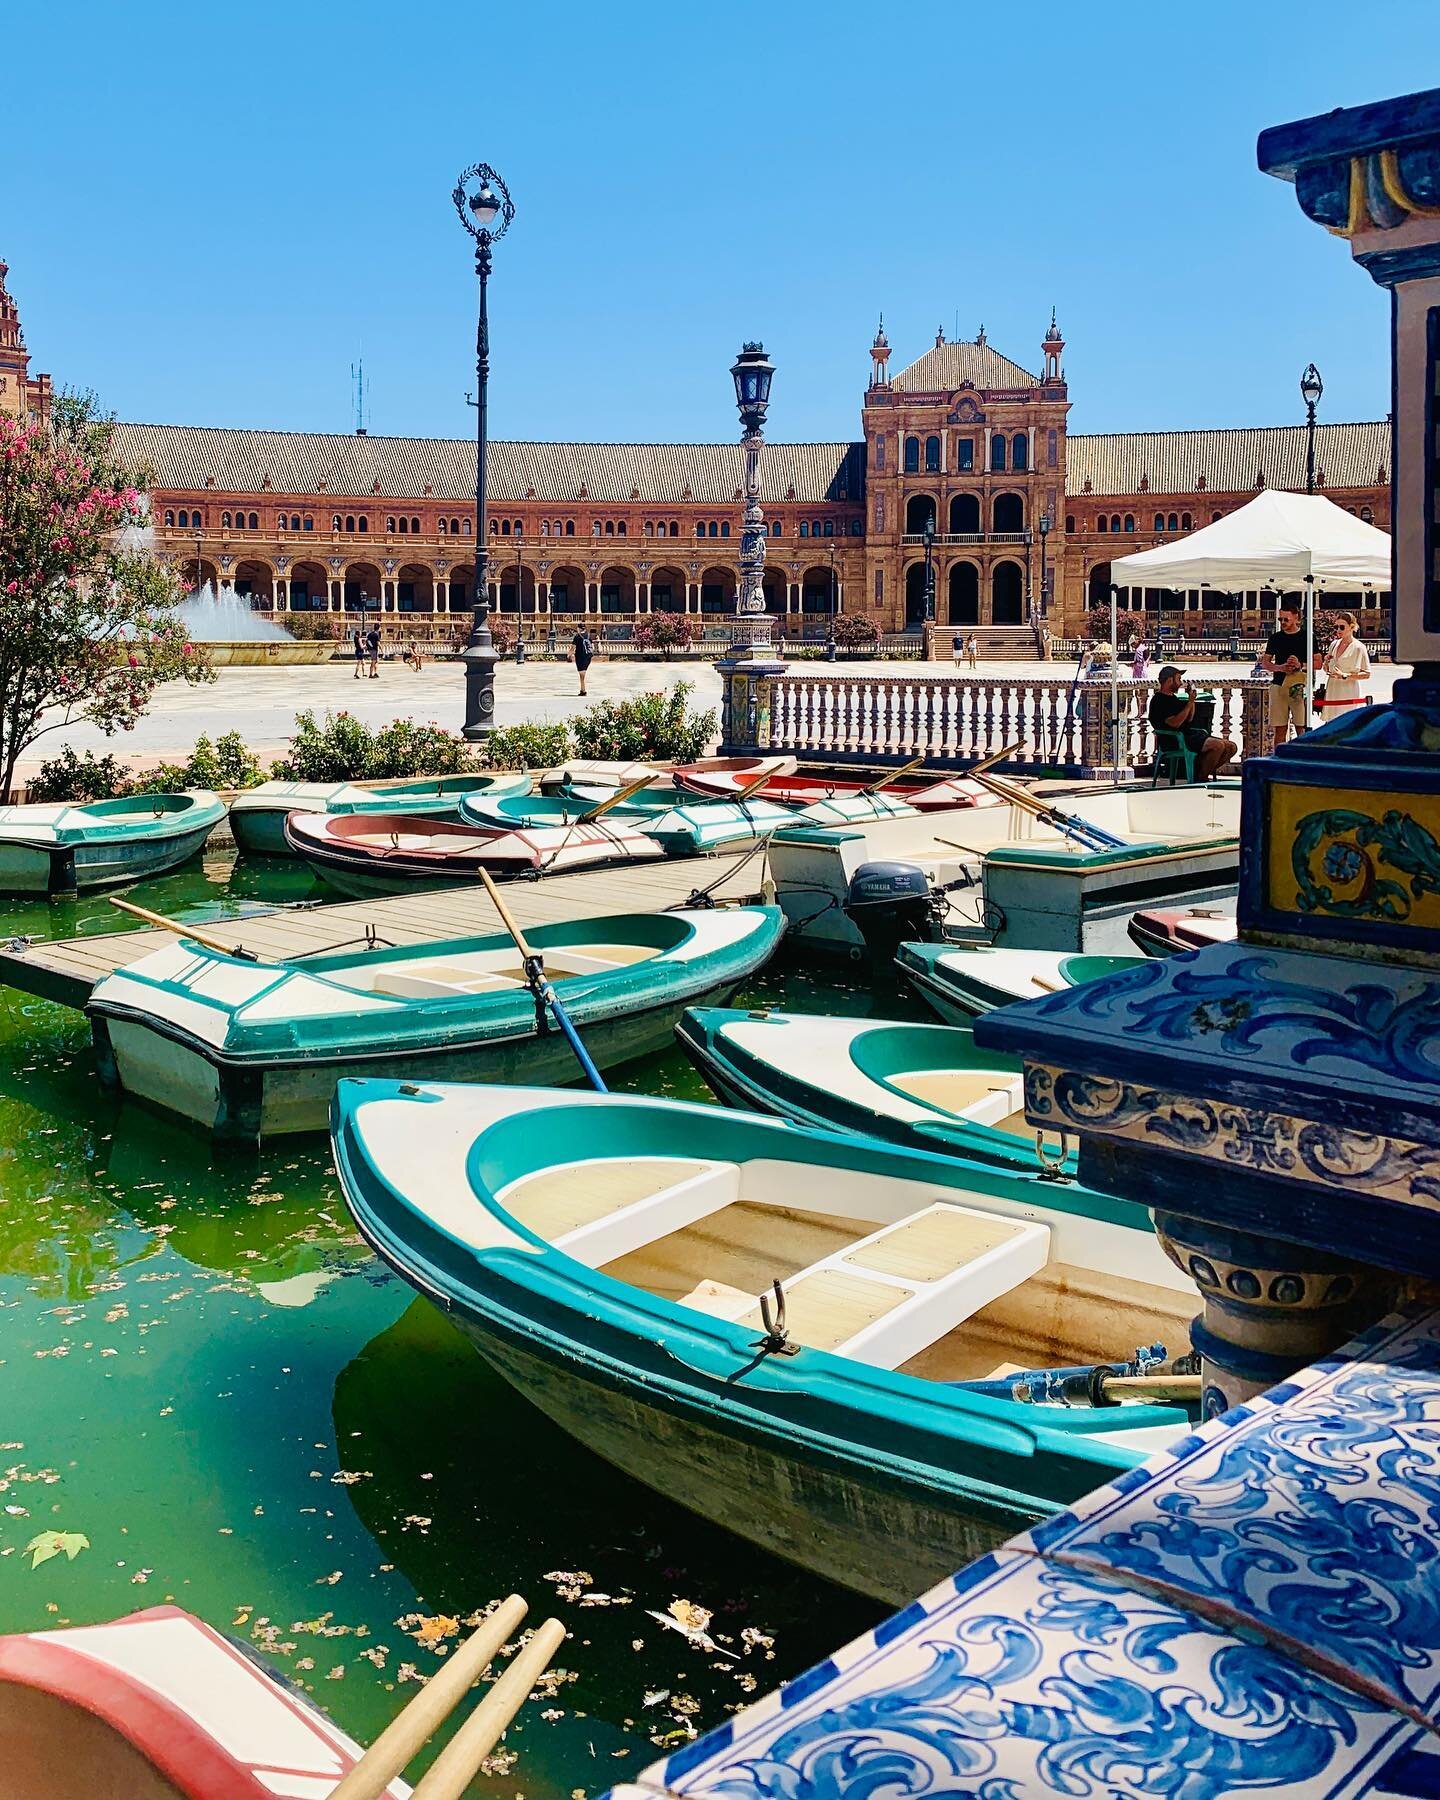 This week our clients are living their dreams in Mexico, Spain, Portugal, Italy and Paris. 

One of our couples who is traveling is enjoying  the beautiful city of Seville.  Here they will see the most fascinating palaces and churches and sample savo